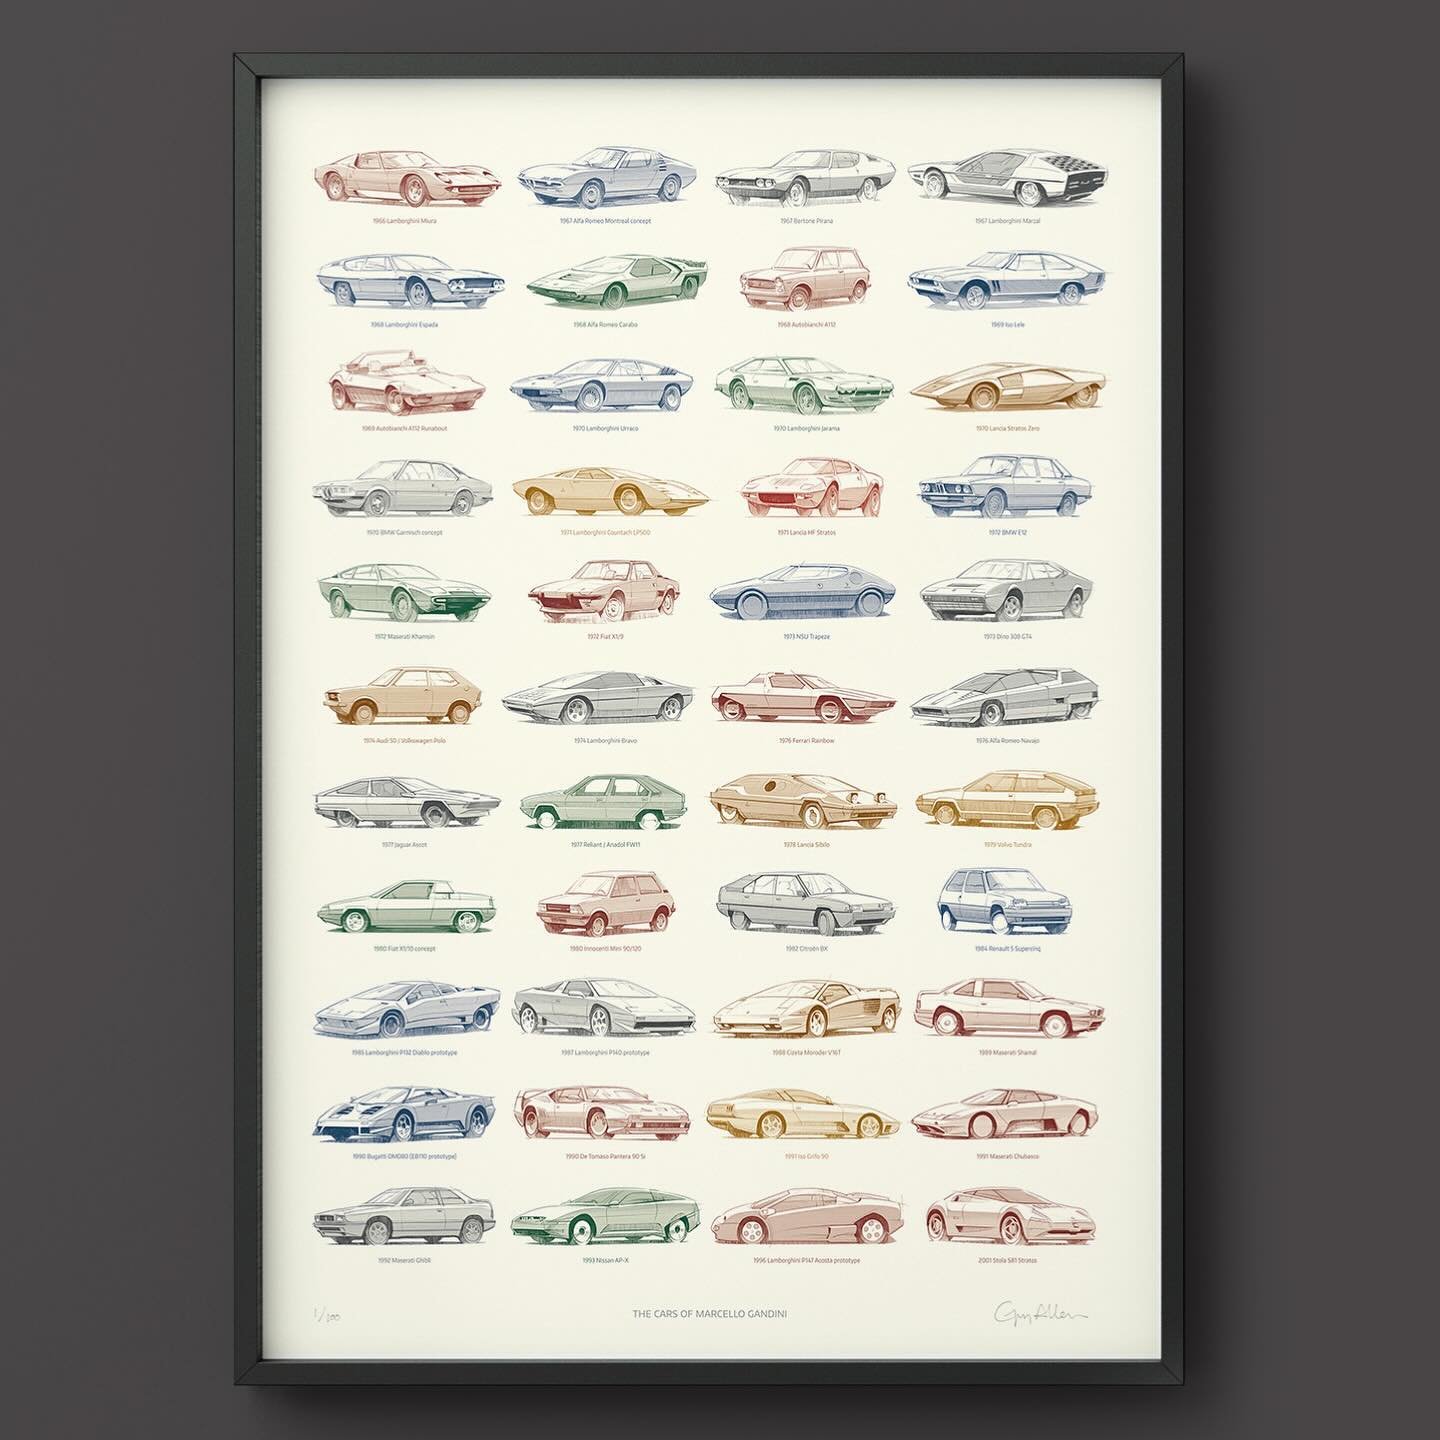 New print featuring &lsquo;The Cars of Marcello Gandini&rsquo;. The illustrations were commissioned by Magneto magazine (appearing in the latest issue - no.22). Forty four cars spanning the career of the legendary Italian designer, including the Miur